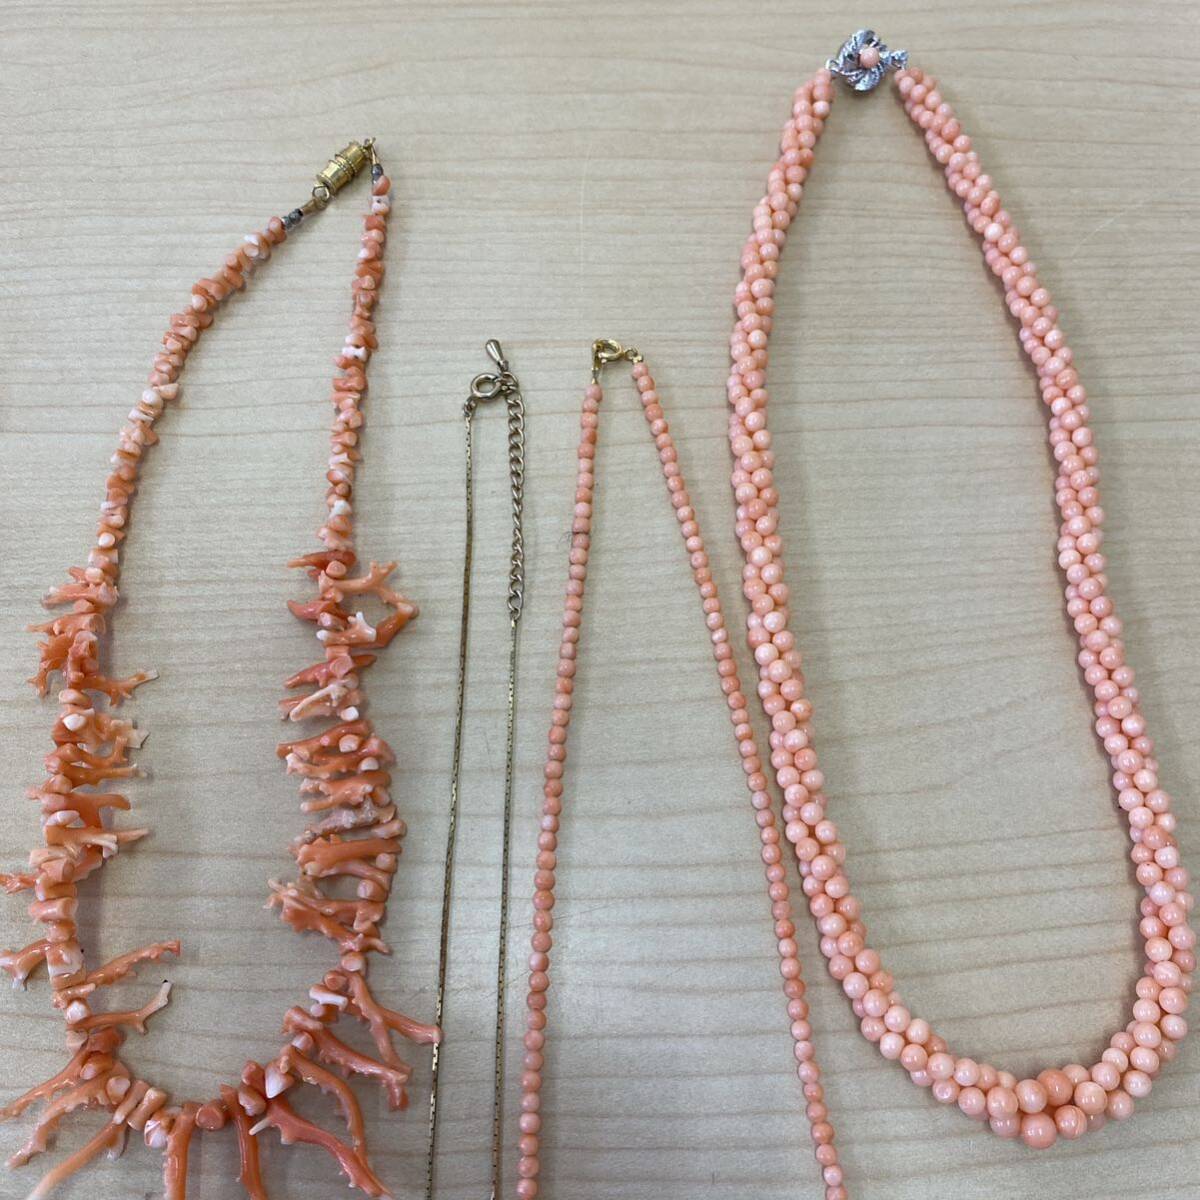 [*T0420] coral? san .?..? accessory summarize approximately 188g necklace earrings brooch tiepin etc. scratch dirt equipped equipped 